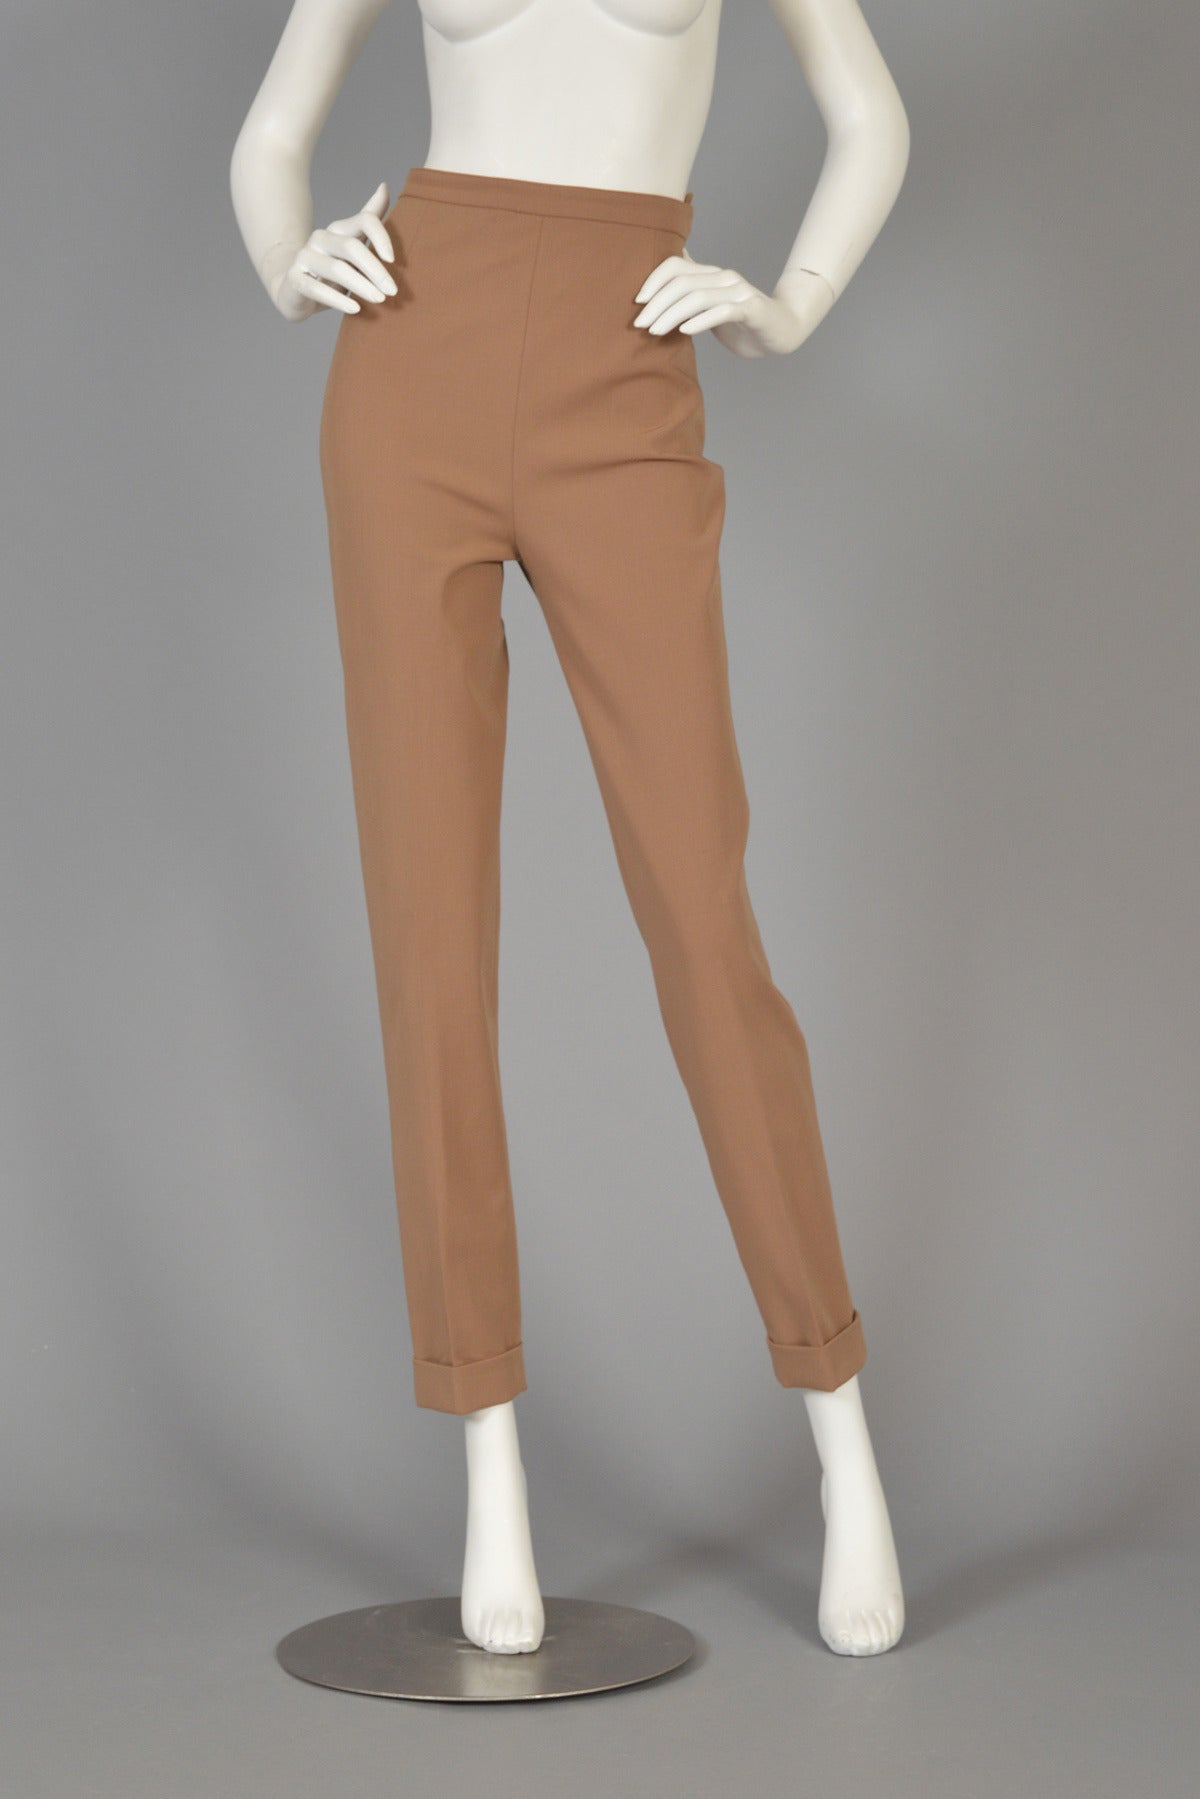 Classic late 1980s/early 90s Hermes riding trousers. Incredible find! Ultra high waist with side zip, tapered legs + cuffed hem. No material tag but feels like a cotton/linen blend. Definitely has a bit of give.

MEASUREMENTS
Waist: 27-28